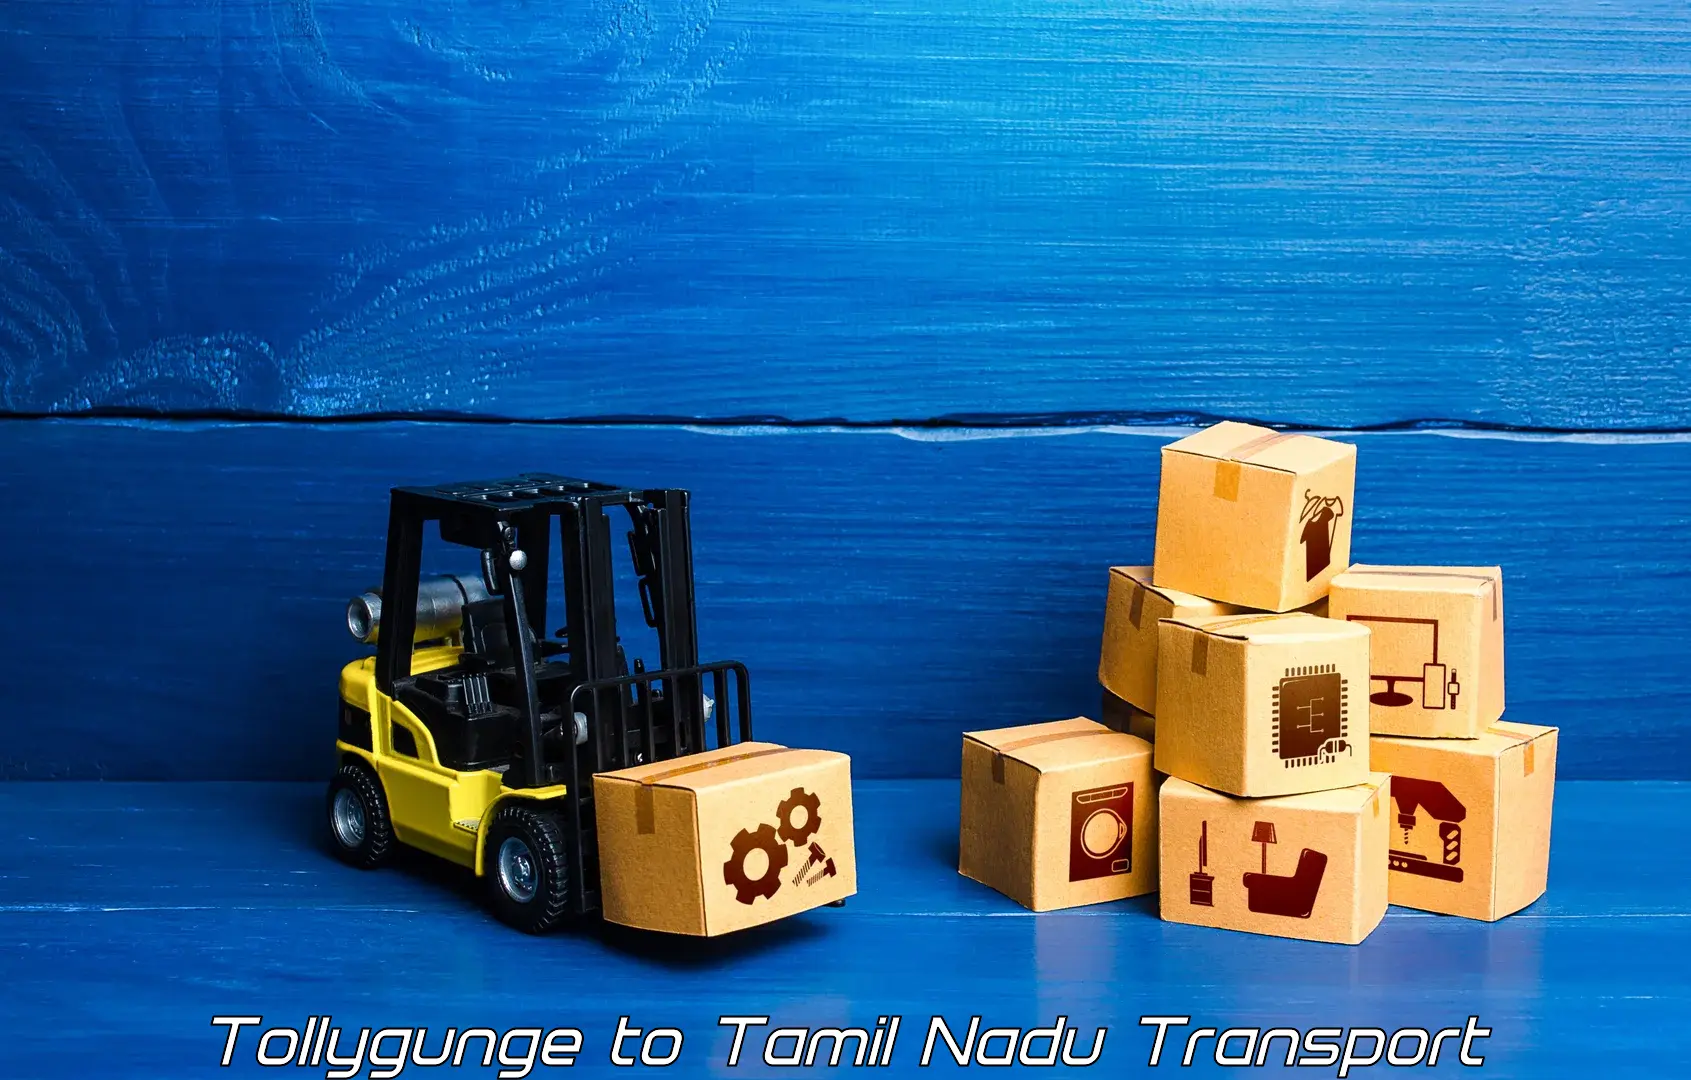 Vehicle transport services Tollygunge to Manapparai